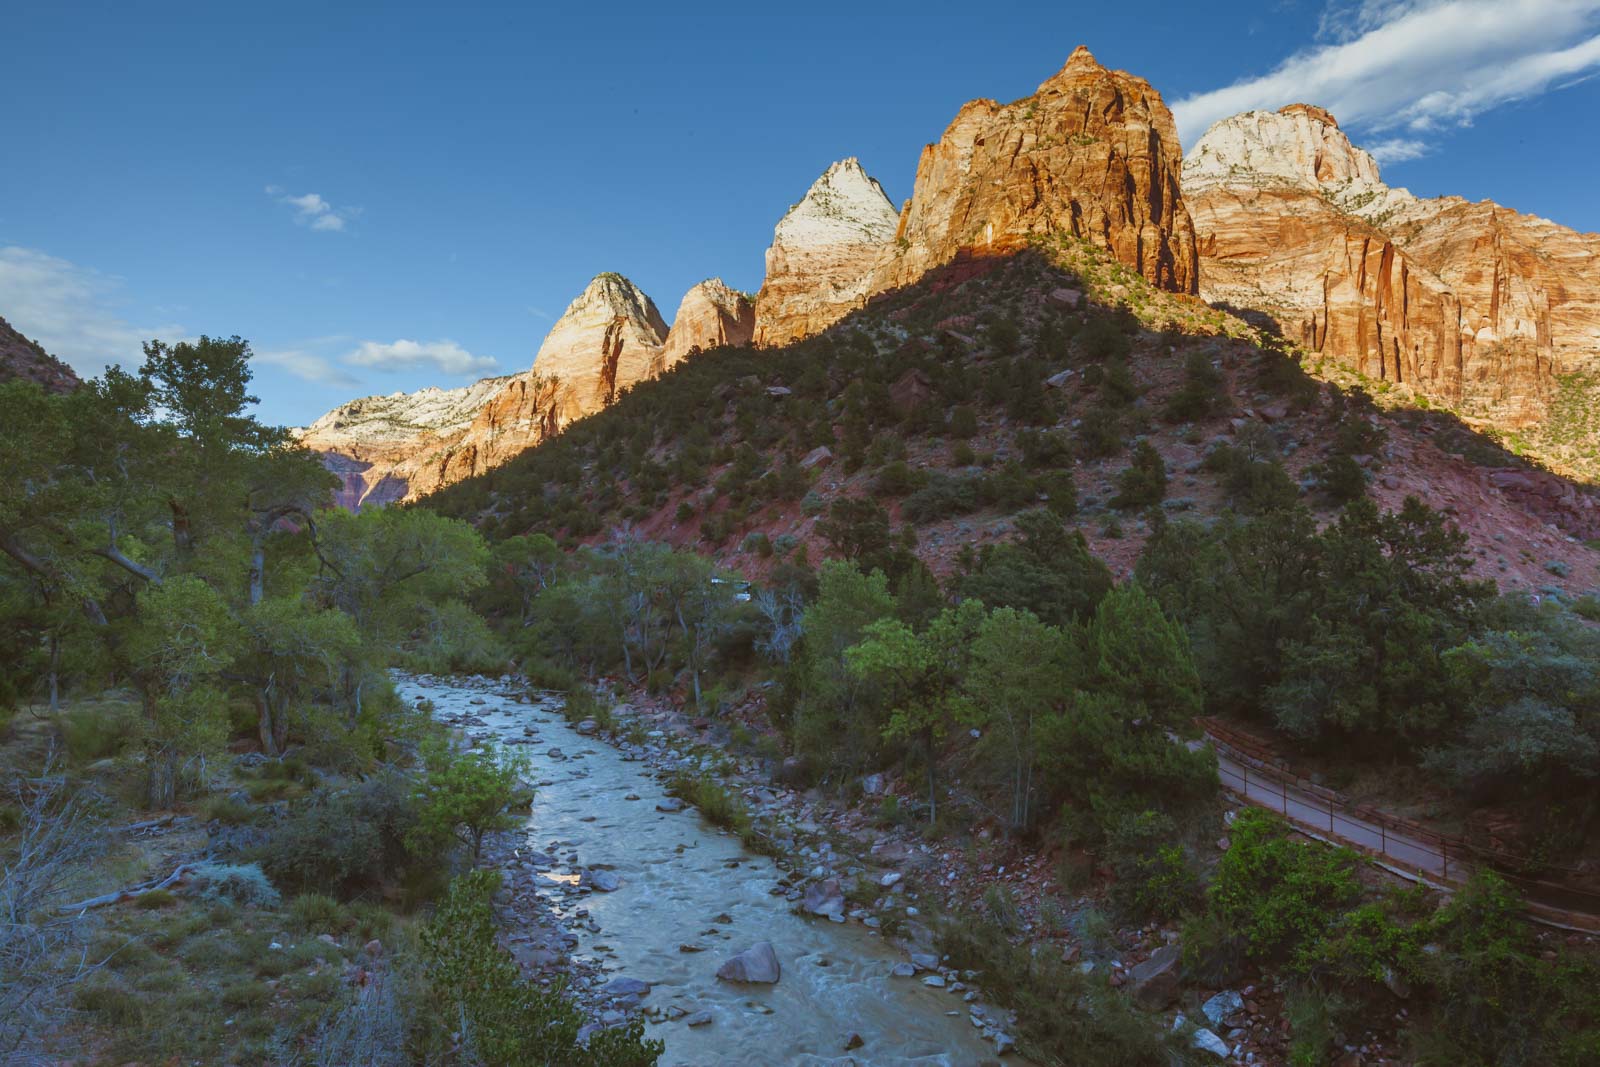 Visiting Zion National Park in March